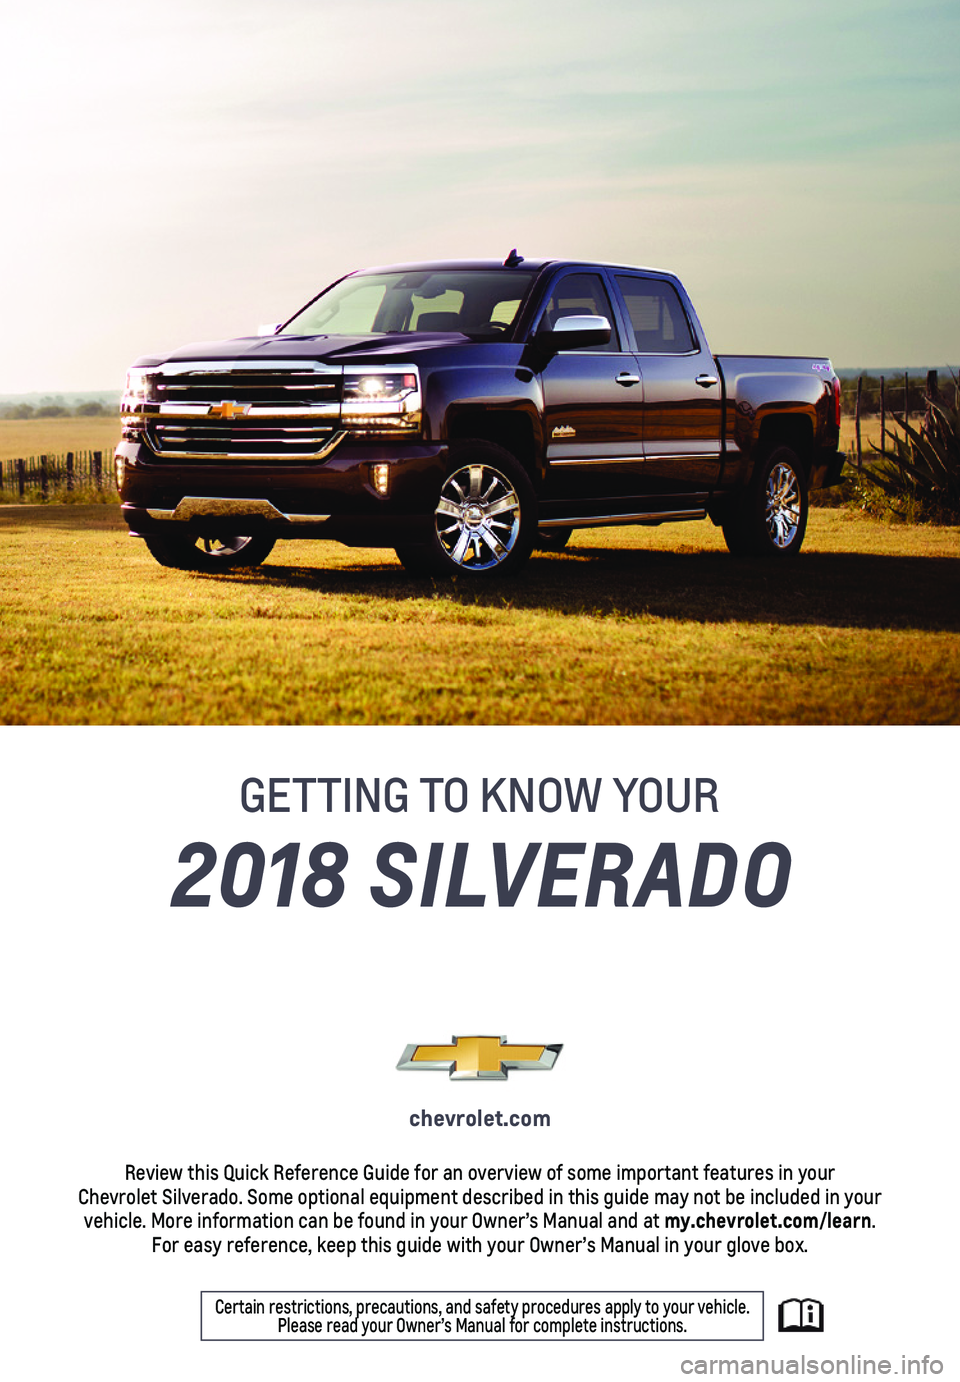 CHEVROLET SILVERADO 2018  Get To Know Guide 1
2018 SILVERADO
GETTING TO KNOW YOUR
chevrolet.com
Review this Quick Reference Guide for an overview of some important feat\
ures in your  Chevrolet Silverado. Some optional equipment described in th